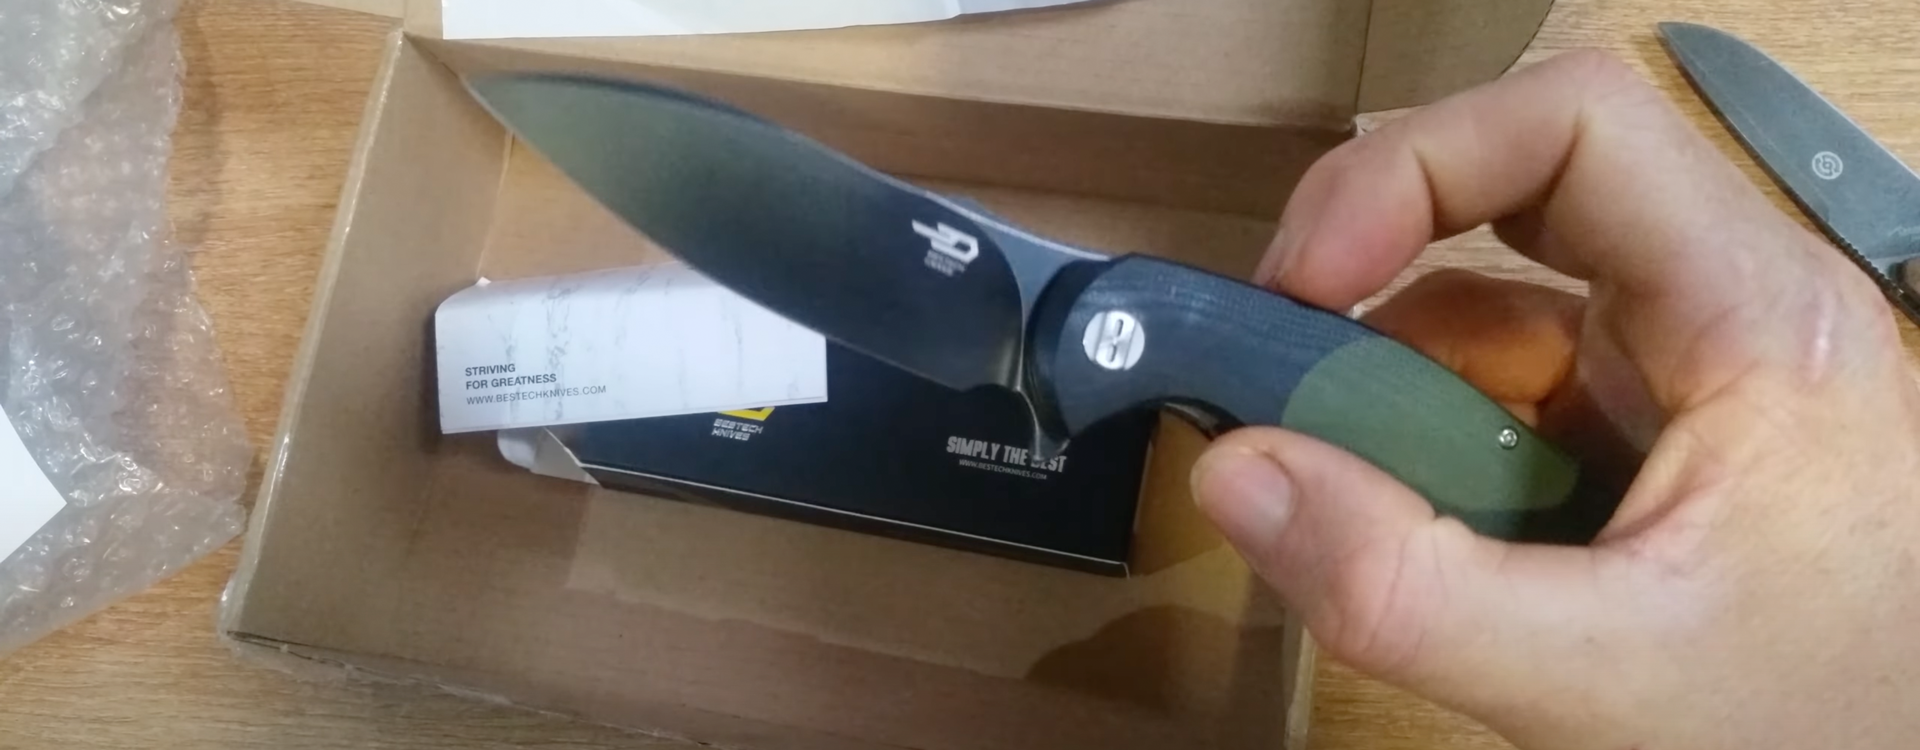 Unboxing video of Bestech knife